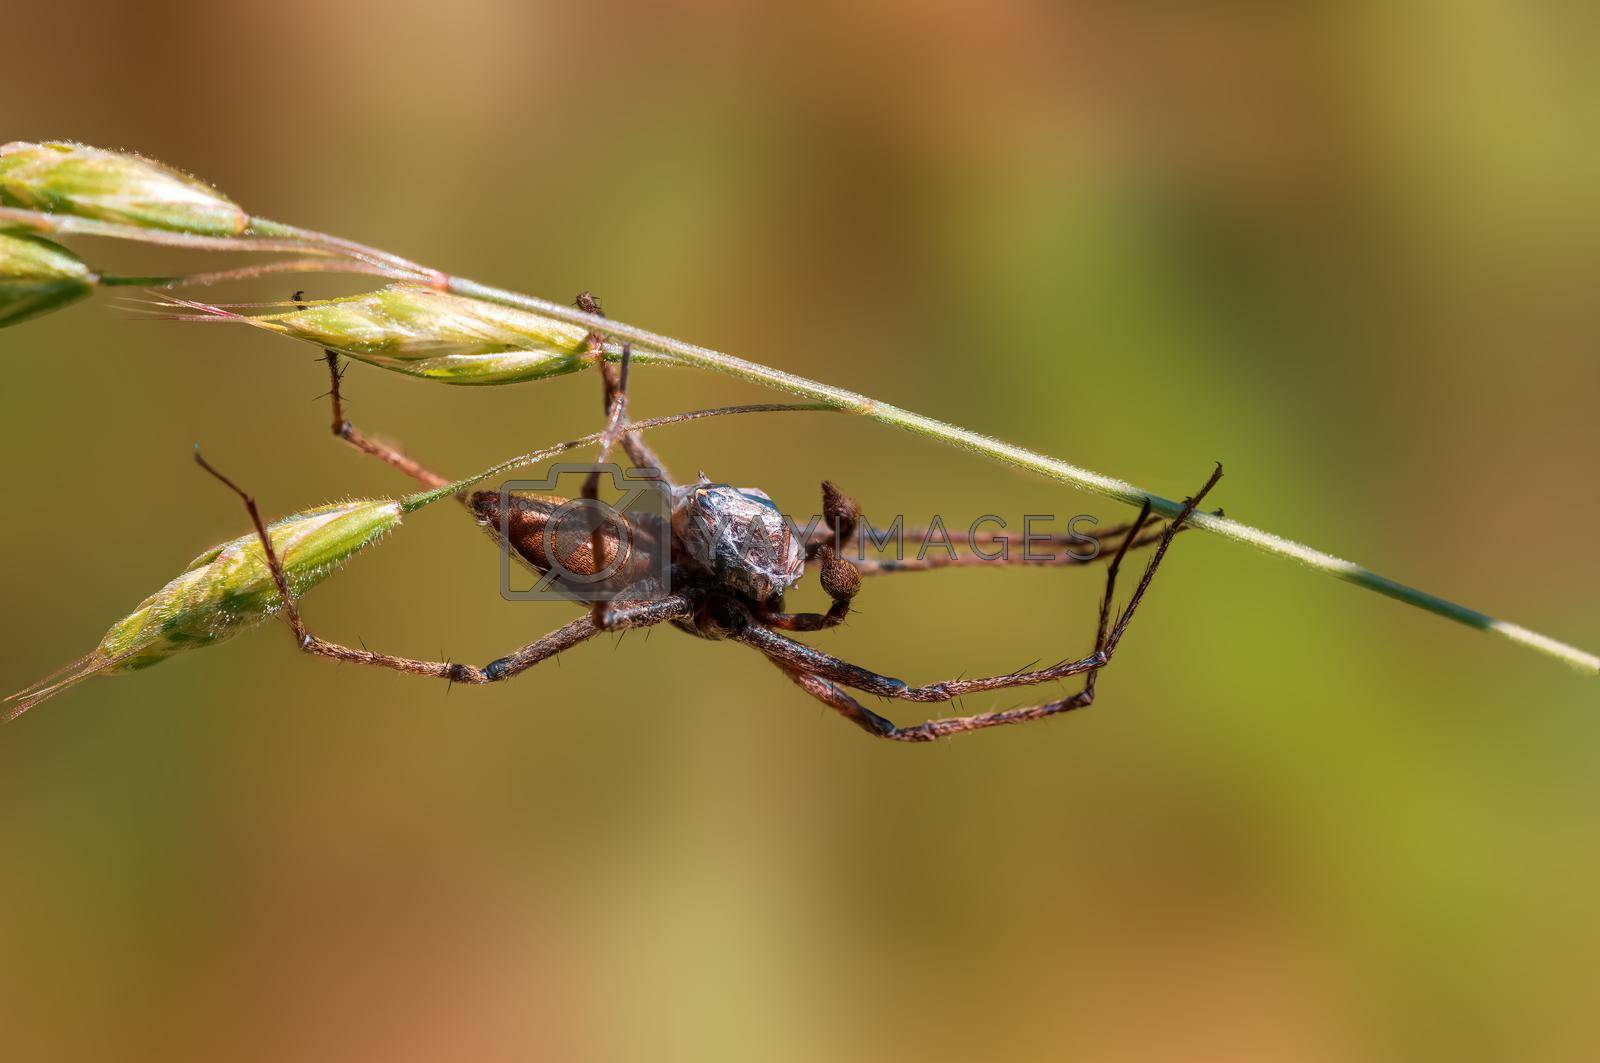 Royalty free image of one predatory spider with prey as a bridal gift by mario_plechaty_photography